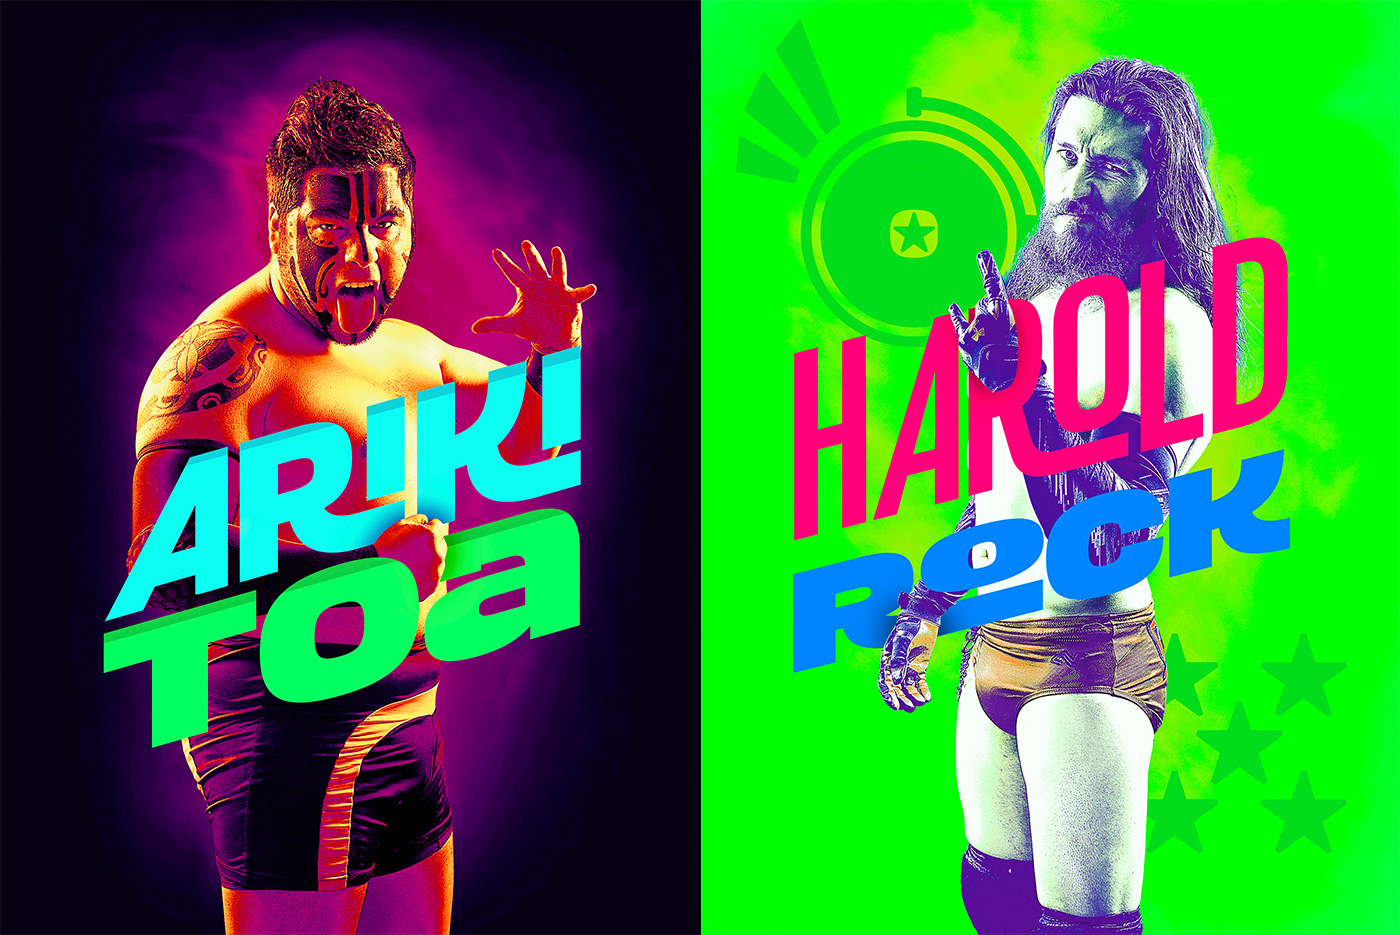 type sports wrestlers lucha libre versus chile font poster series Wrestling